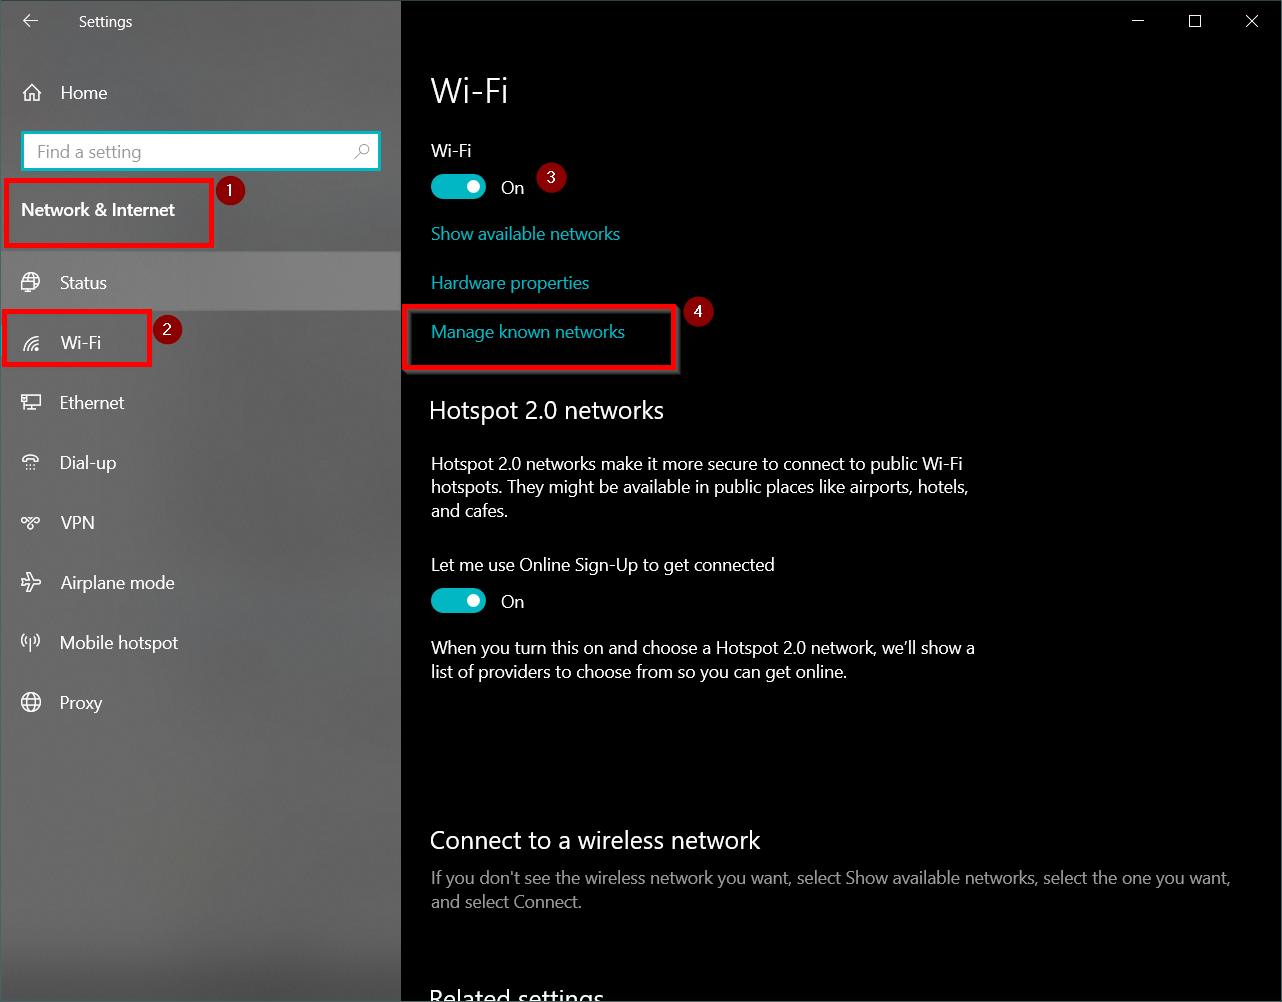 The Golden Throw Fix for linking Windows 10 WiFi instantly